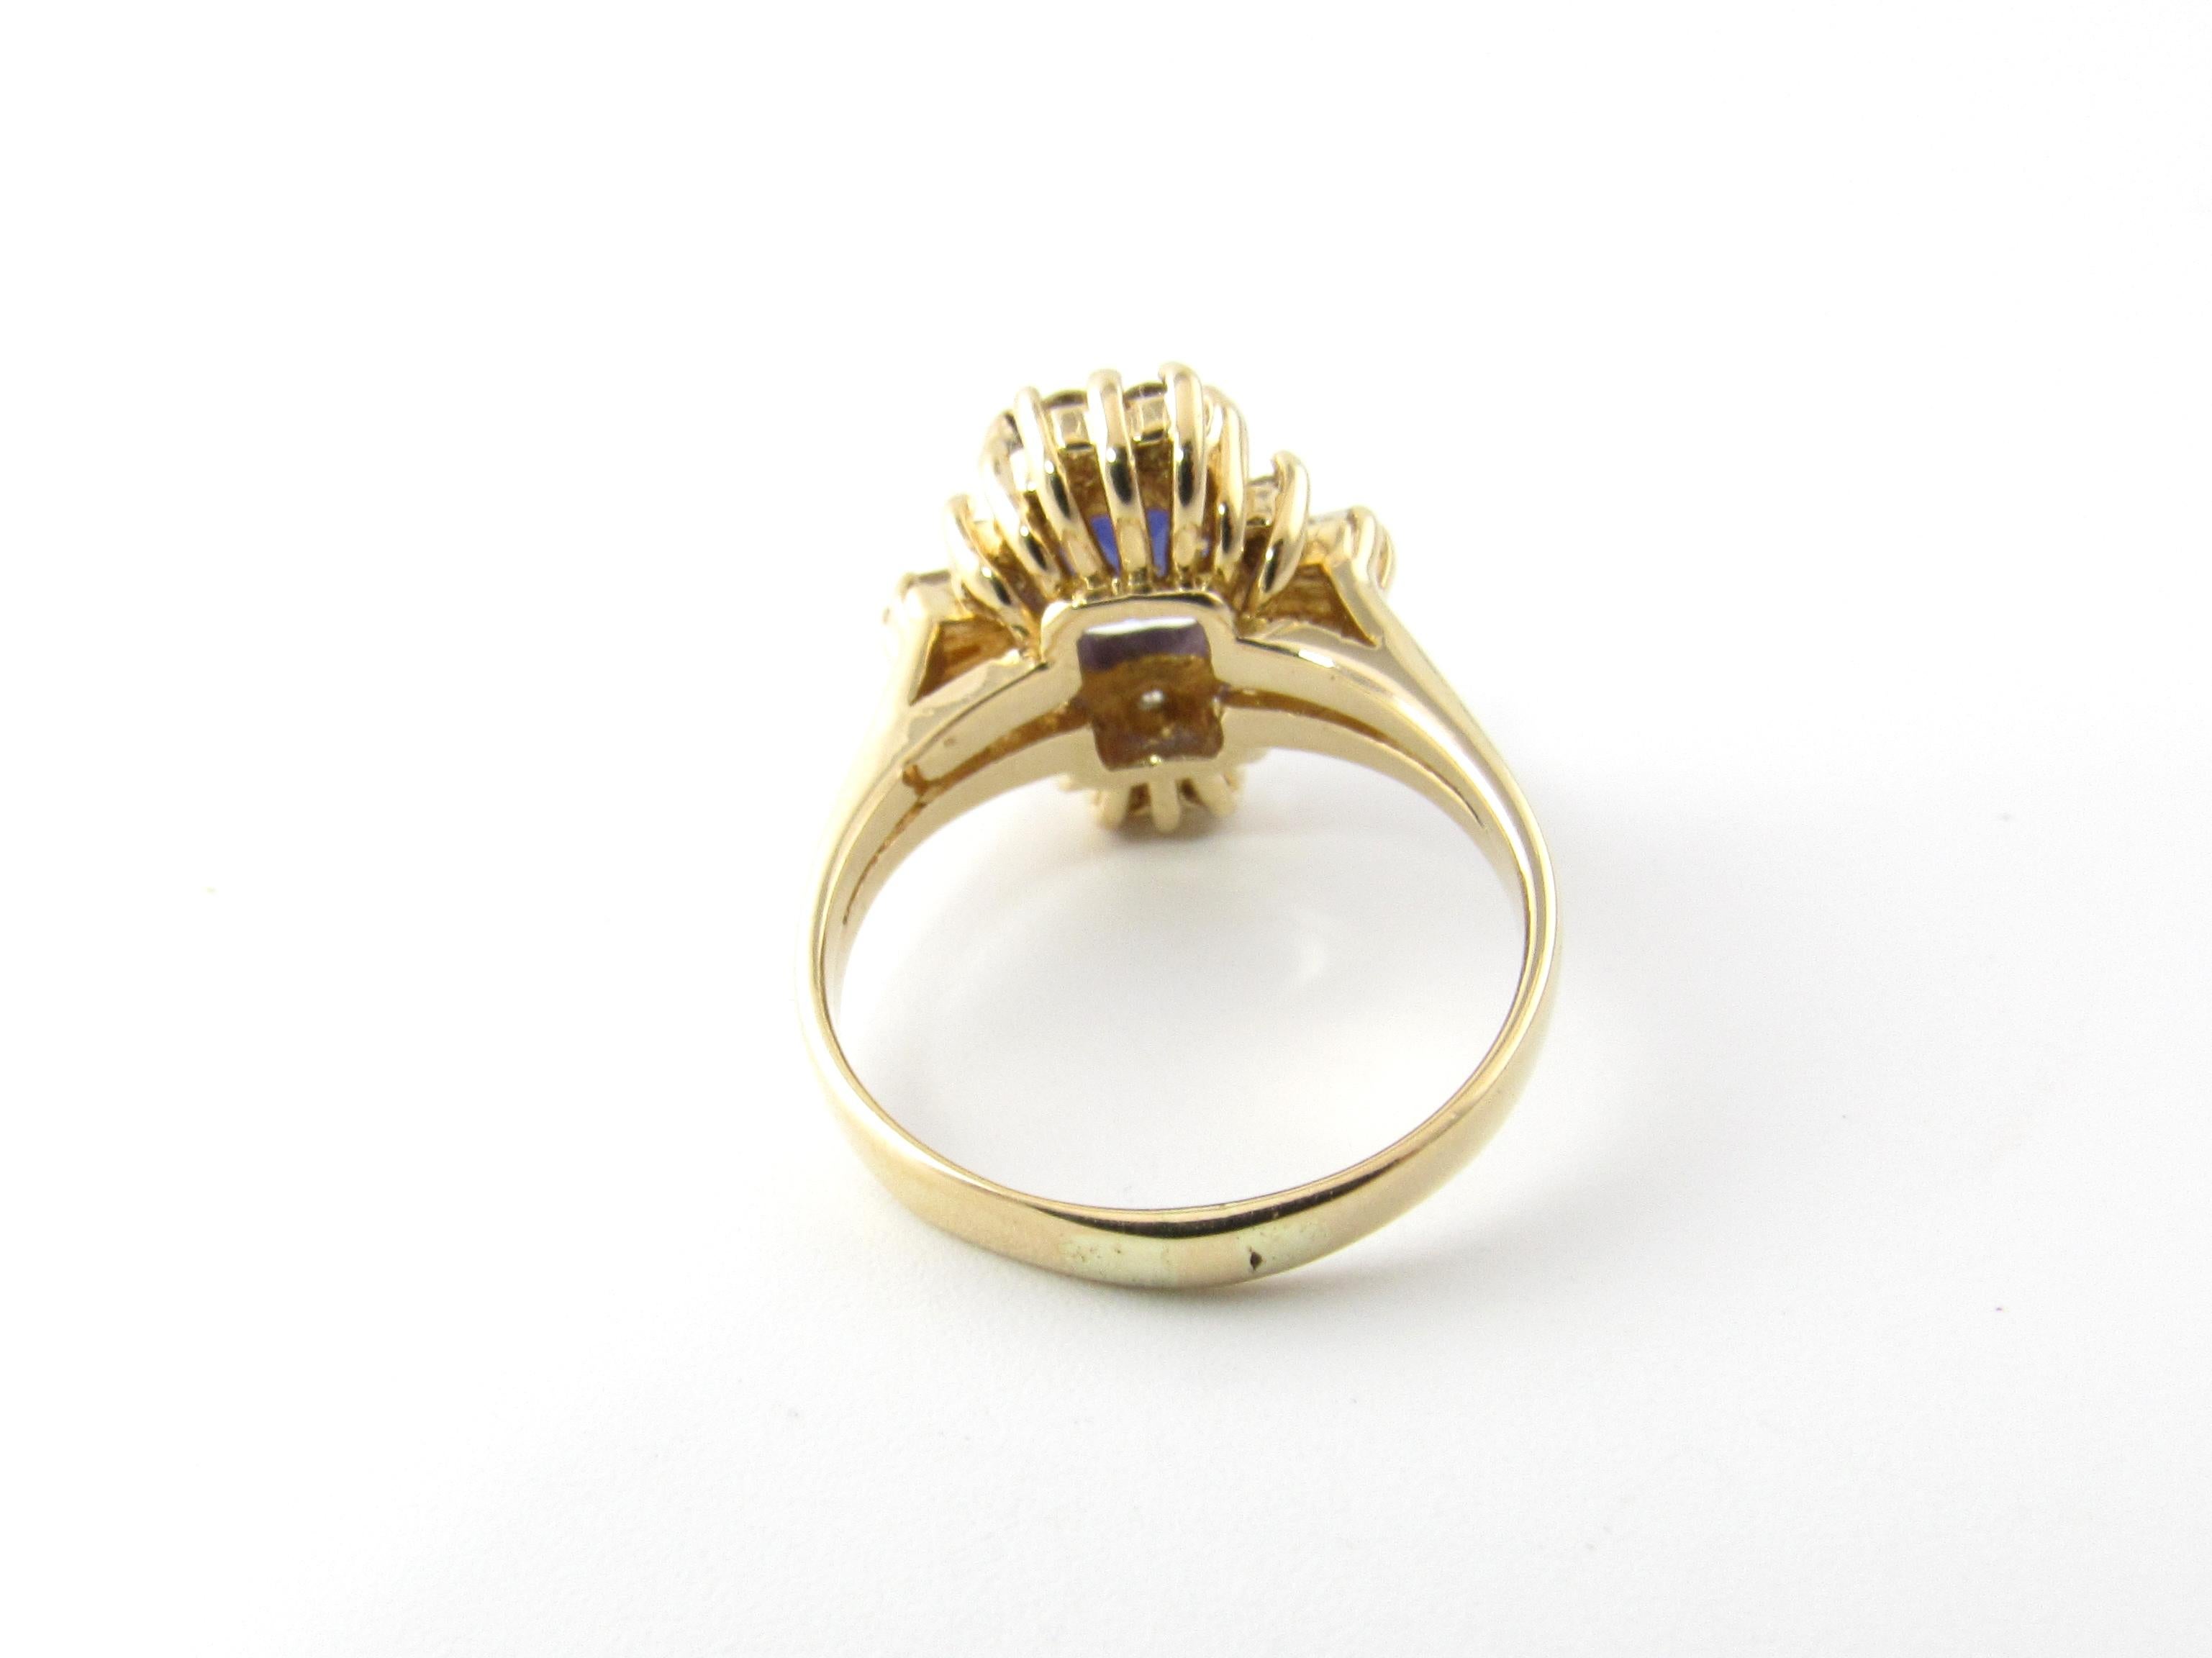 Vintage 14 Karat Yellow Gold Amethyst and Diamond Ring Size 6

This elegant ring features one oval amethyst (8 mm x 7 mm) surrounded by six baguette diamonds (.30 ct. twt.) and 14 round brilliant cut diamonds (.28 ct. twt.) set in classic 14K yellow